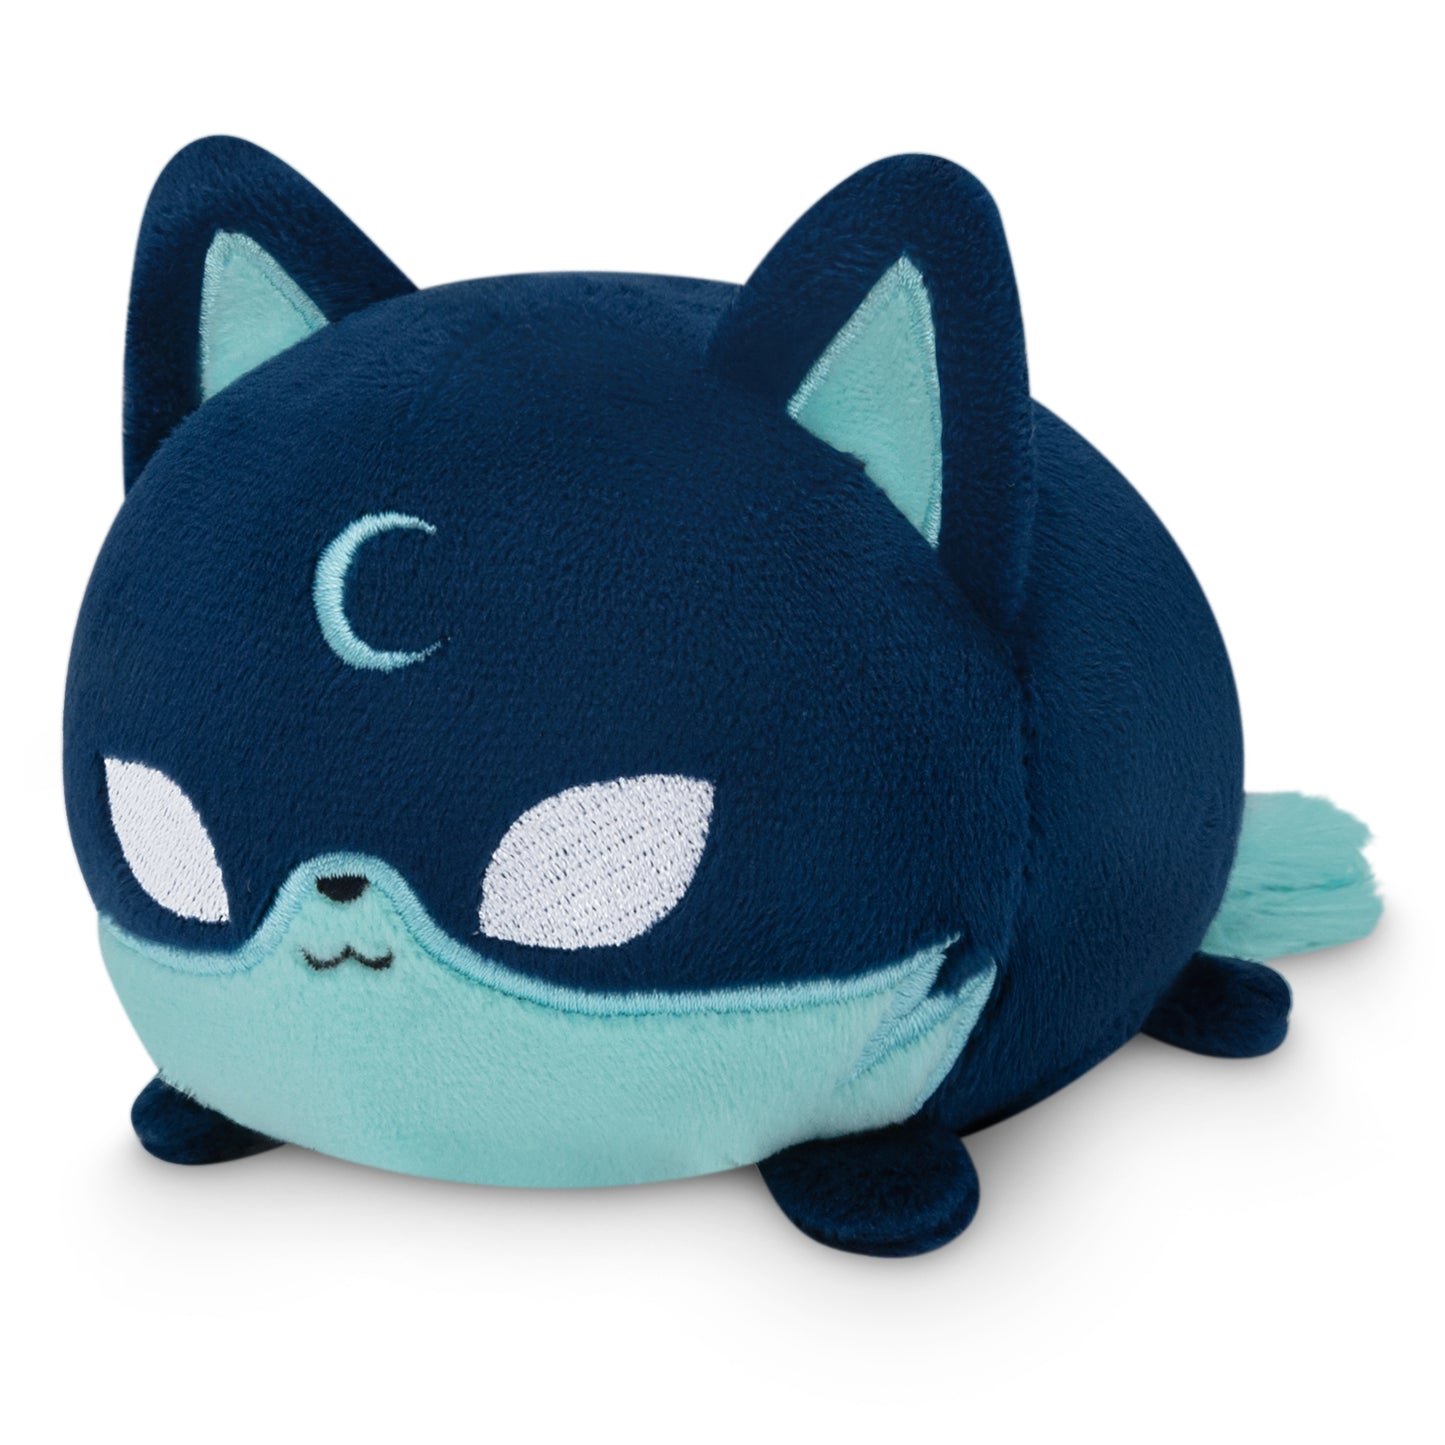 A Plushiverse Starry Fox Plushie Tote Bag featuring the adorable TeeTurtle cat on it.